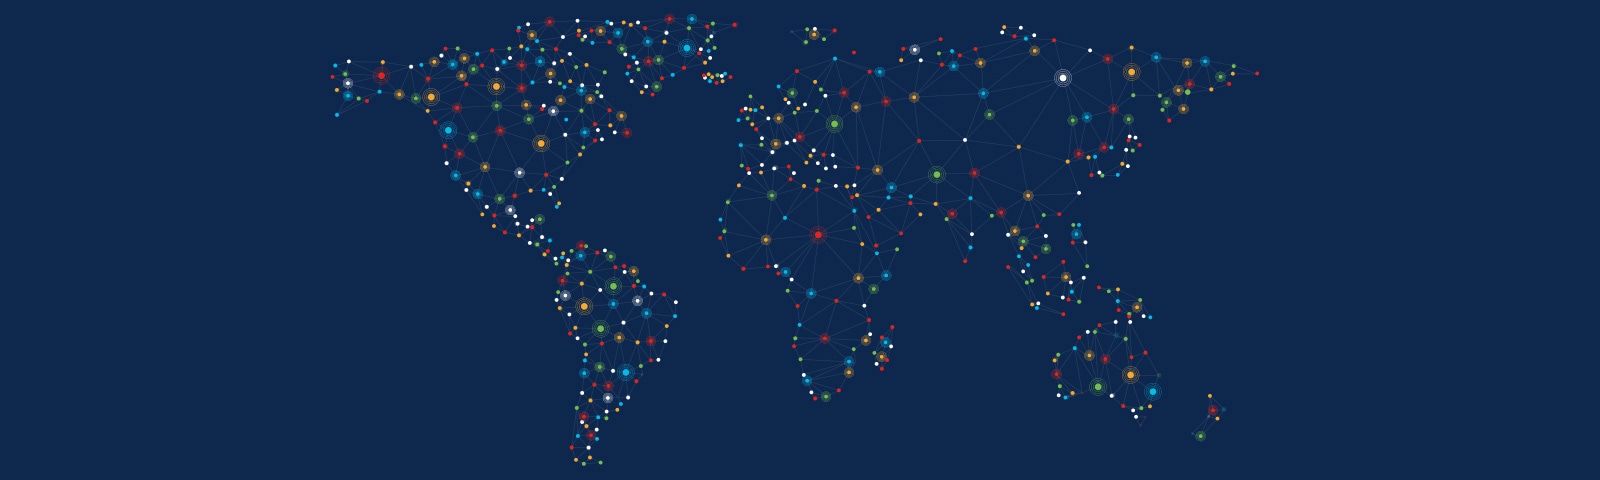 Image of a world map, with colored dots illustrating digital connection